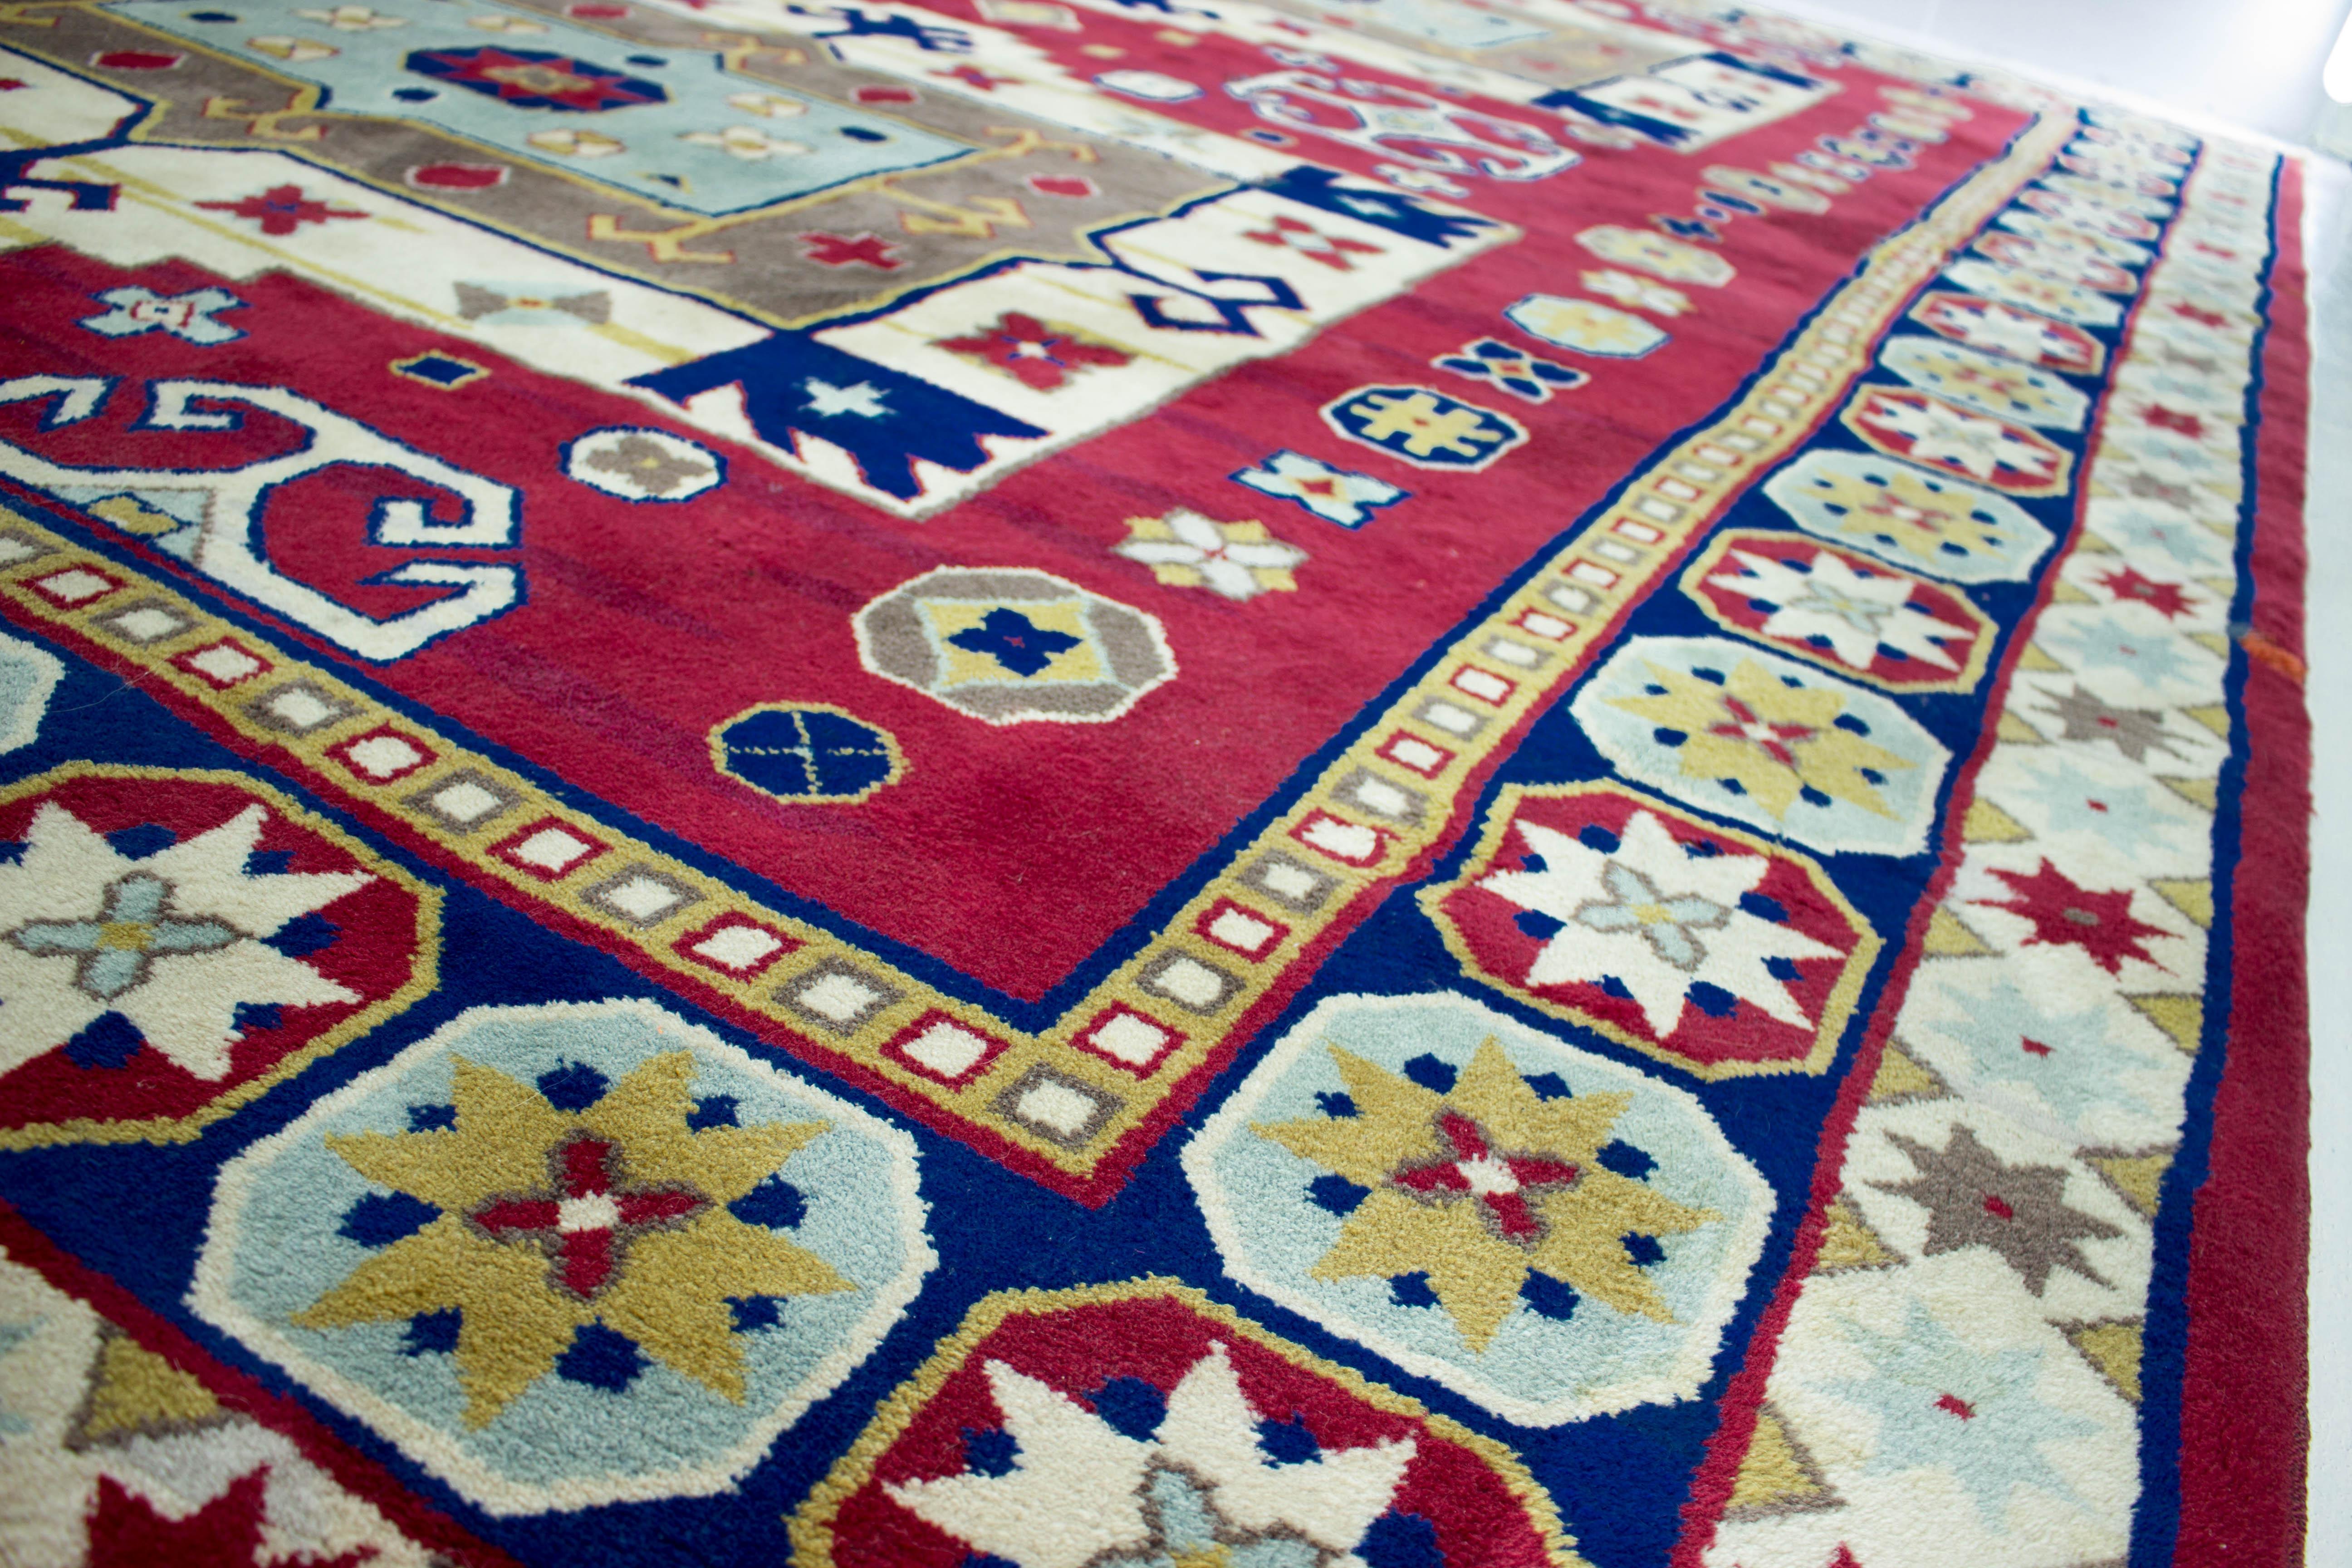 This hand knotted Kazak was made in 1960s and was professionally cleaned.
Caucasian carpets were made by many different tribal groups, they have many common characteristics. Sought after by collectors and designers, these carpets are characterized